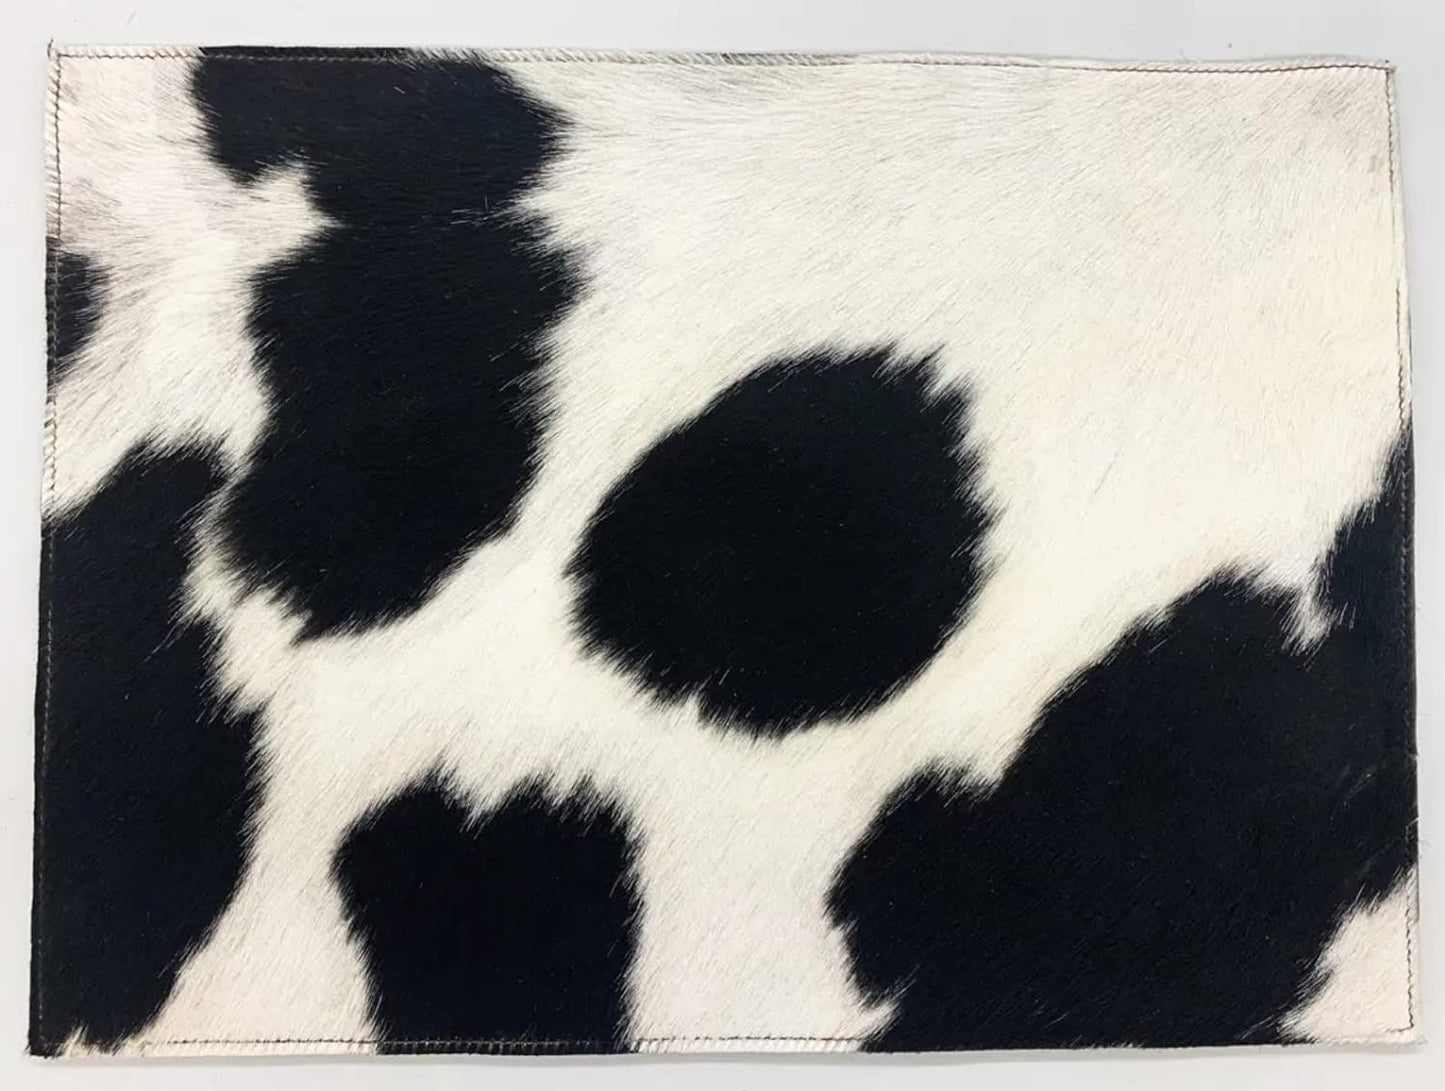 Rodeo cowhide placemats - Rodeo Cowhide Rugs